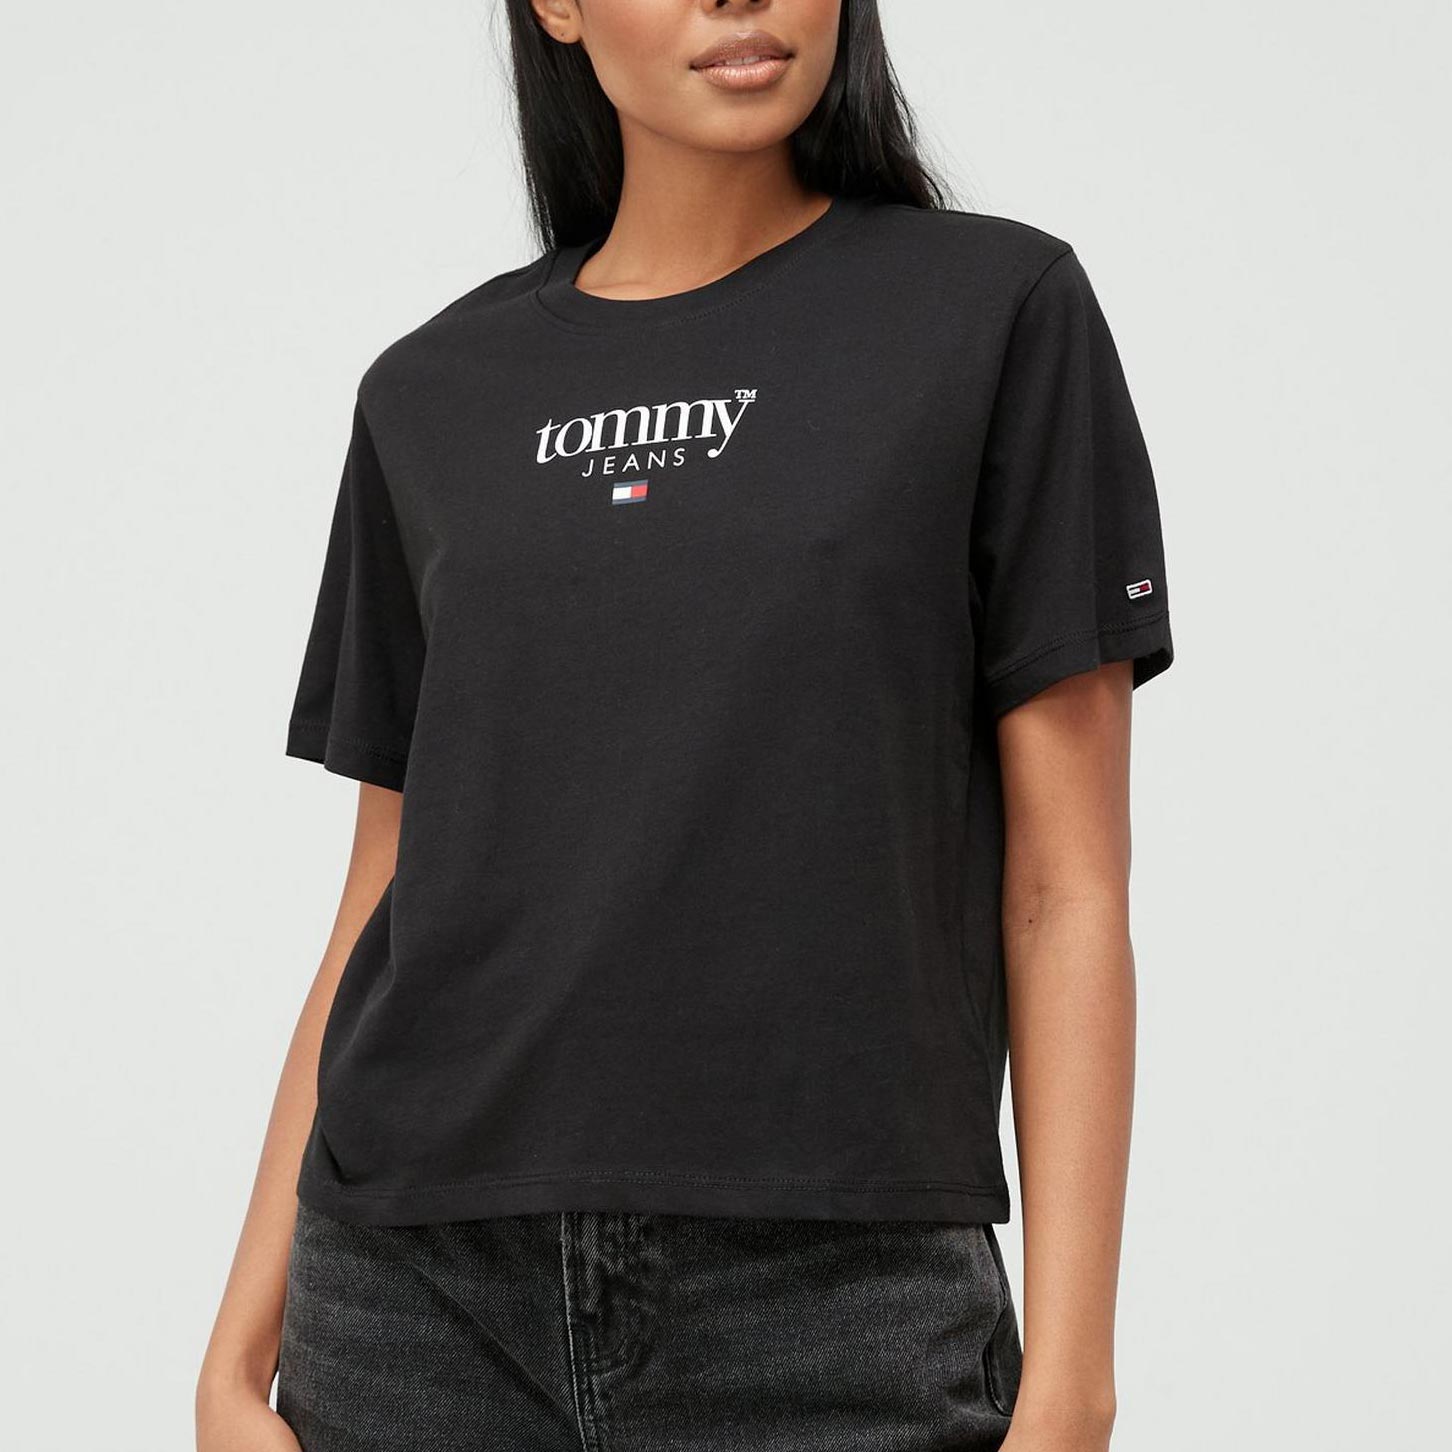 Tommy Jeans Woman's Classic Essential Logo Tee - Black